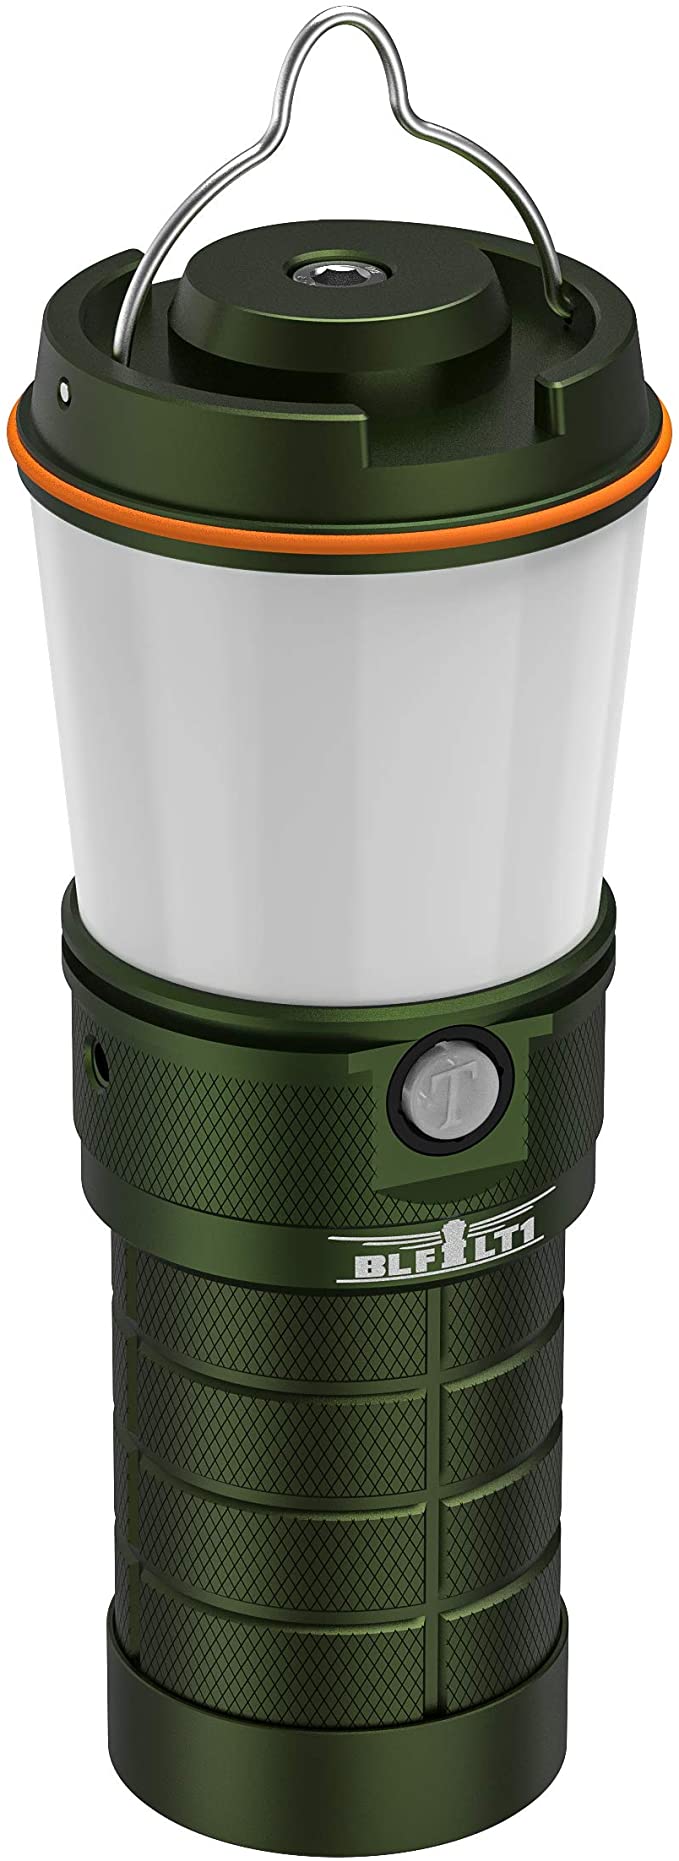 Camping Lantern，Sofirn BLF LT1 Rechargeable Water Resistant Dimmable LED Flashlight for Hiking, Hurricanes, Storms, Emergency, Outdoors, Survival, Bushcraft